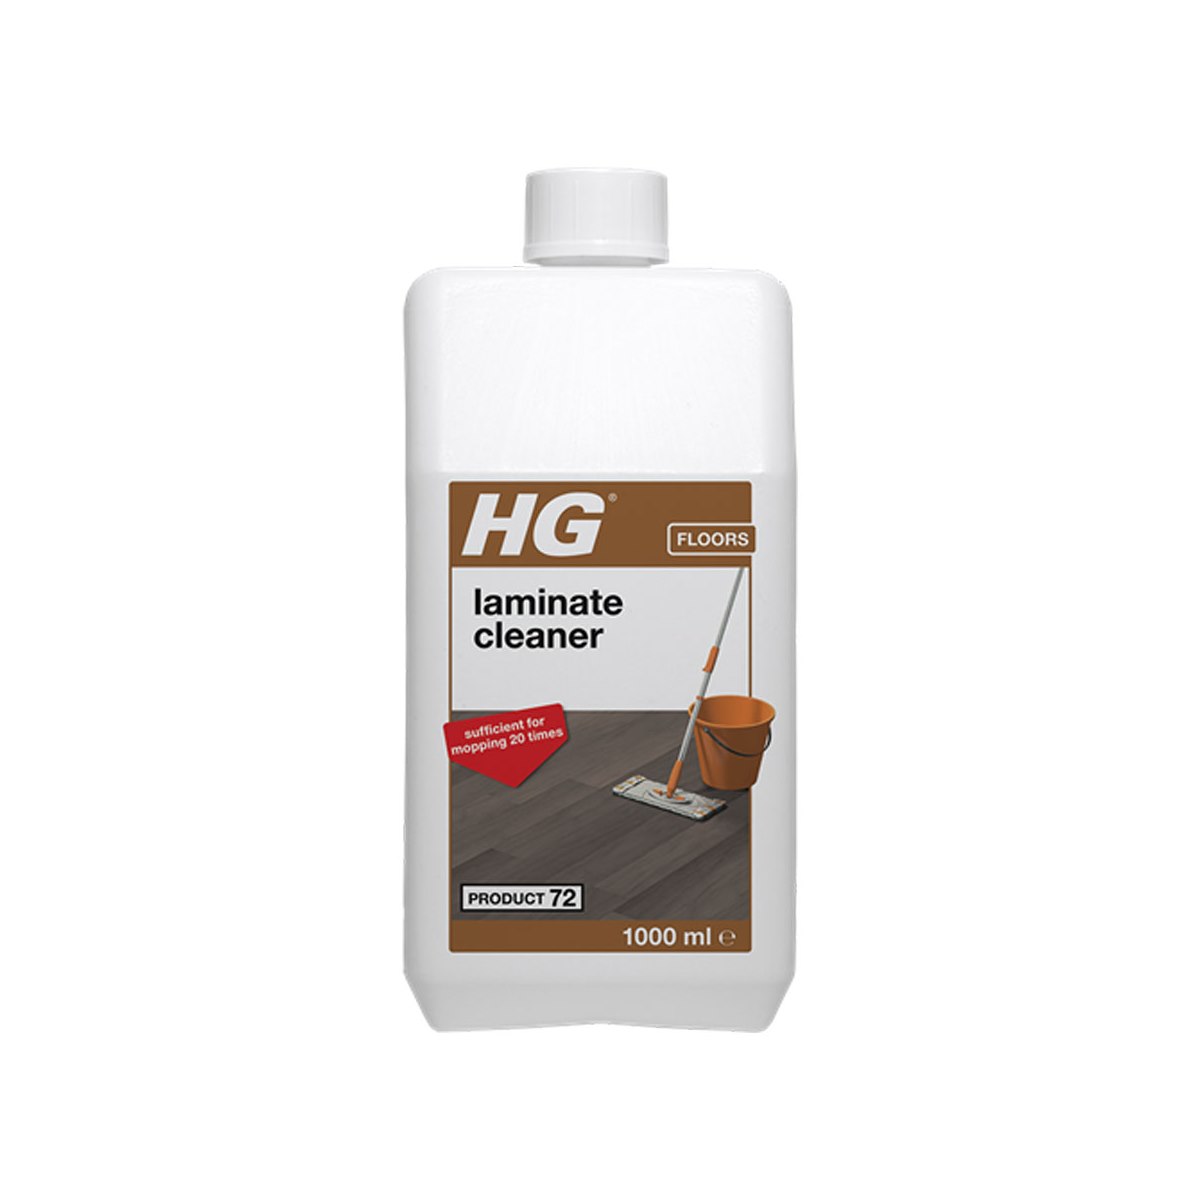 HG Laminate Cleaner 1 Litre Product 72